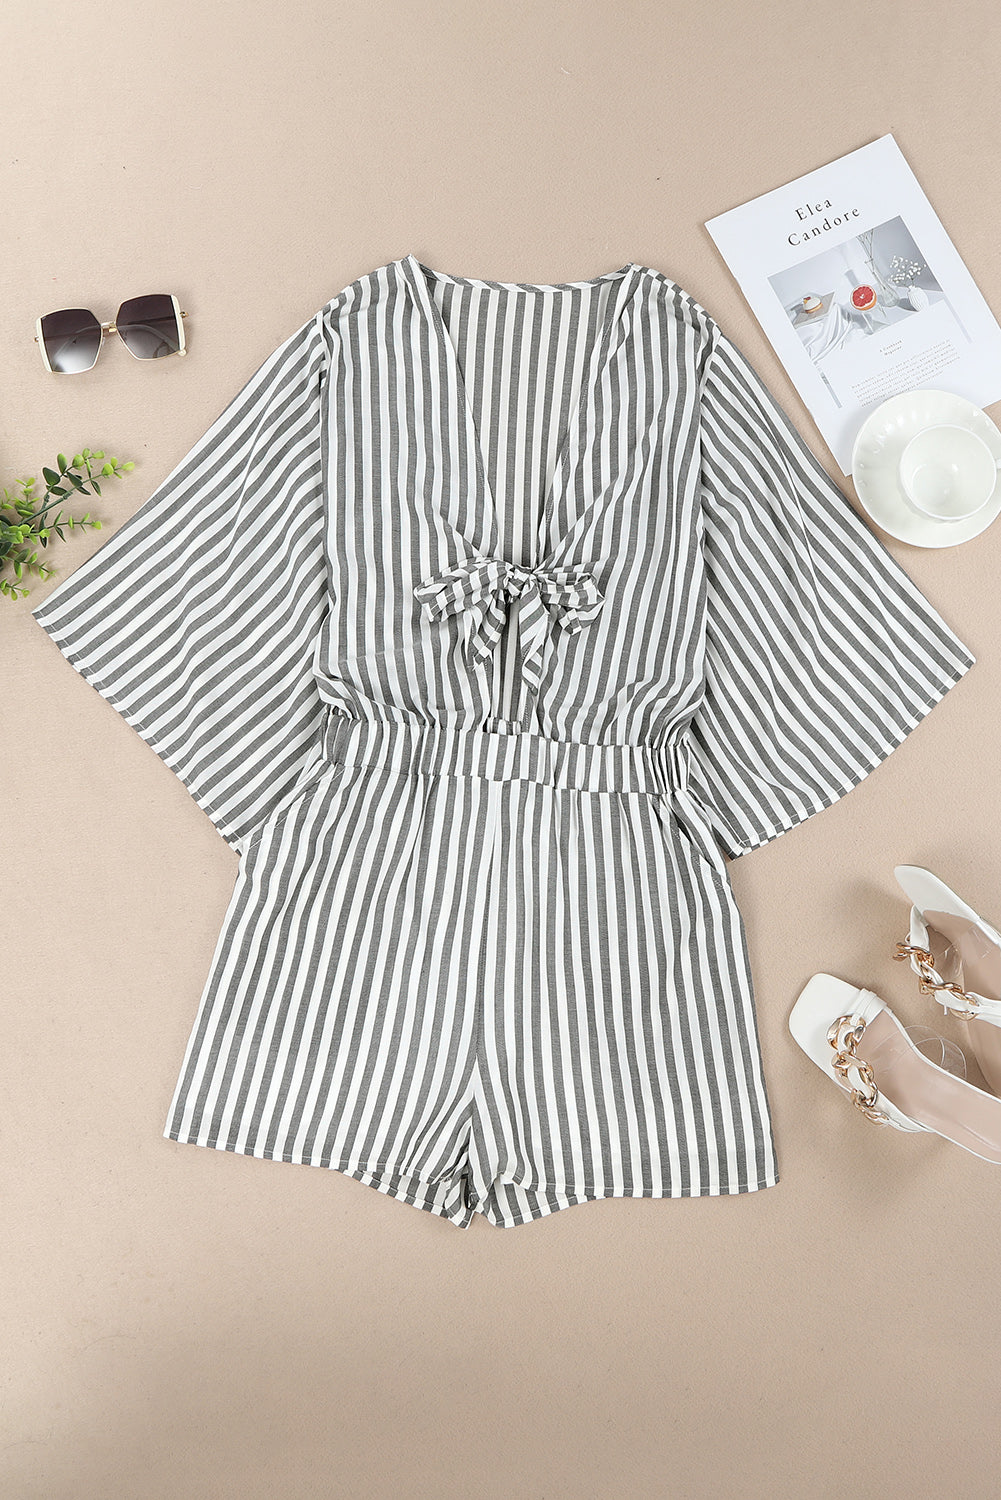 Grey Striped Print Tie Knot Front Romper With Pockets